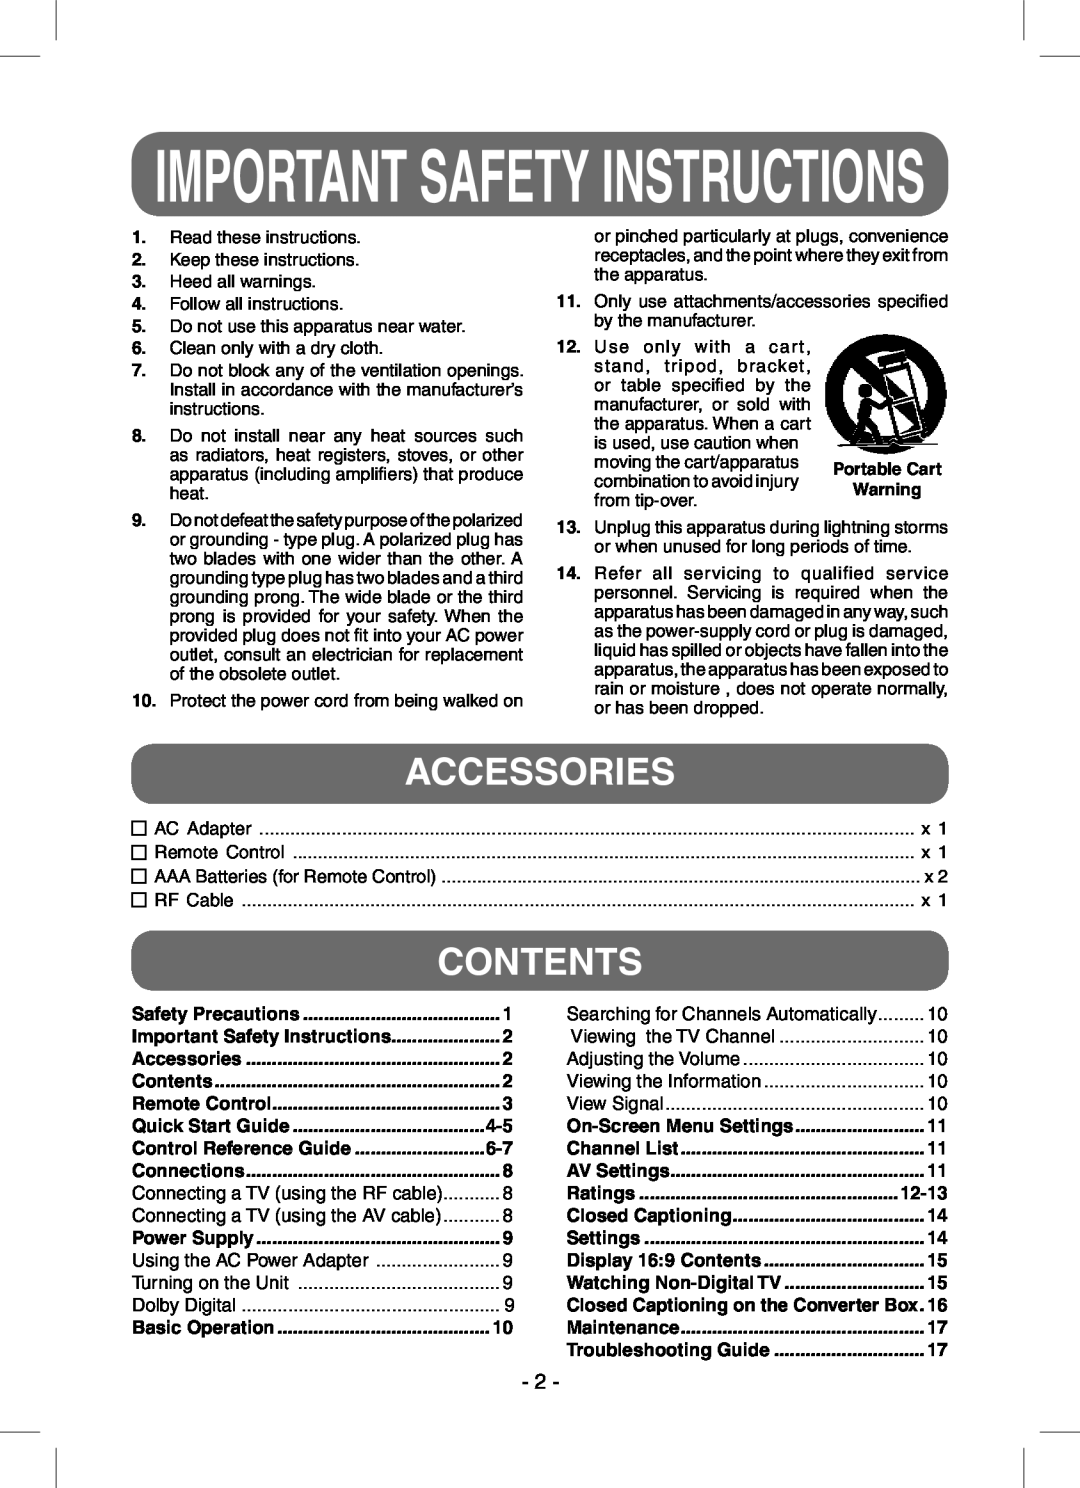 RCA STB7766C Accessories, Contents, Read these instructions, Keep these instructions, Heed all warnings, Portable Cart 